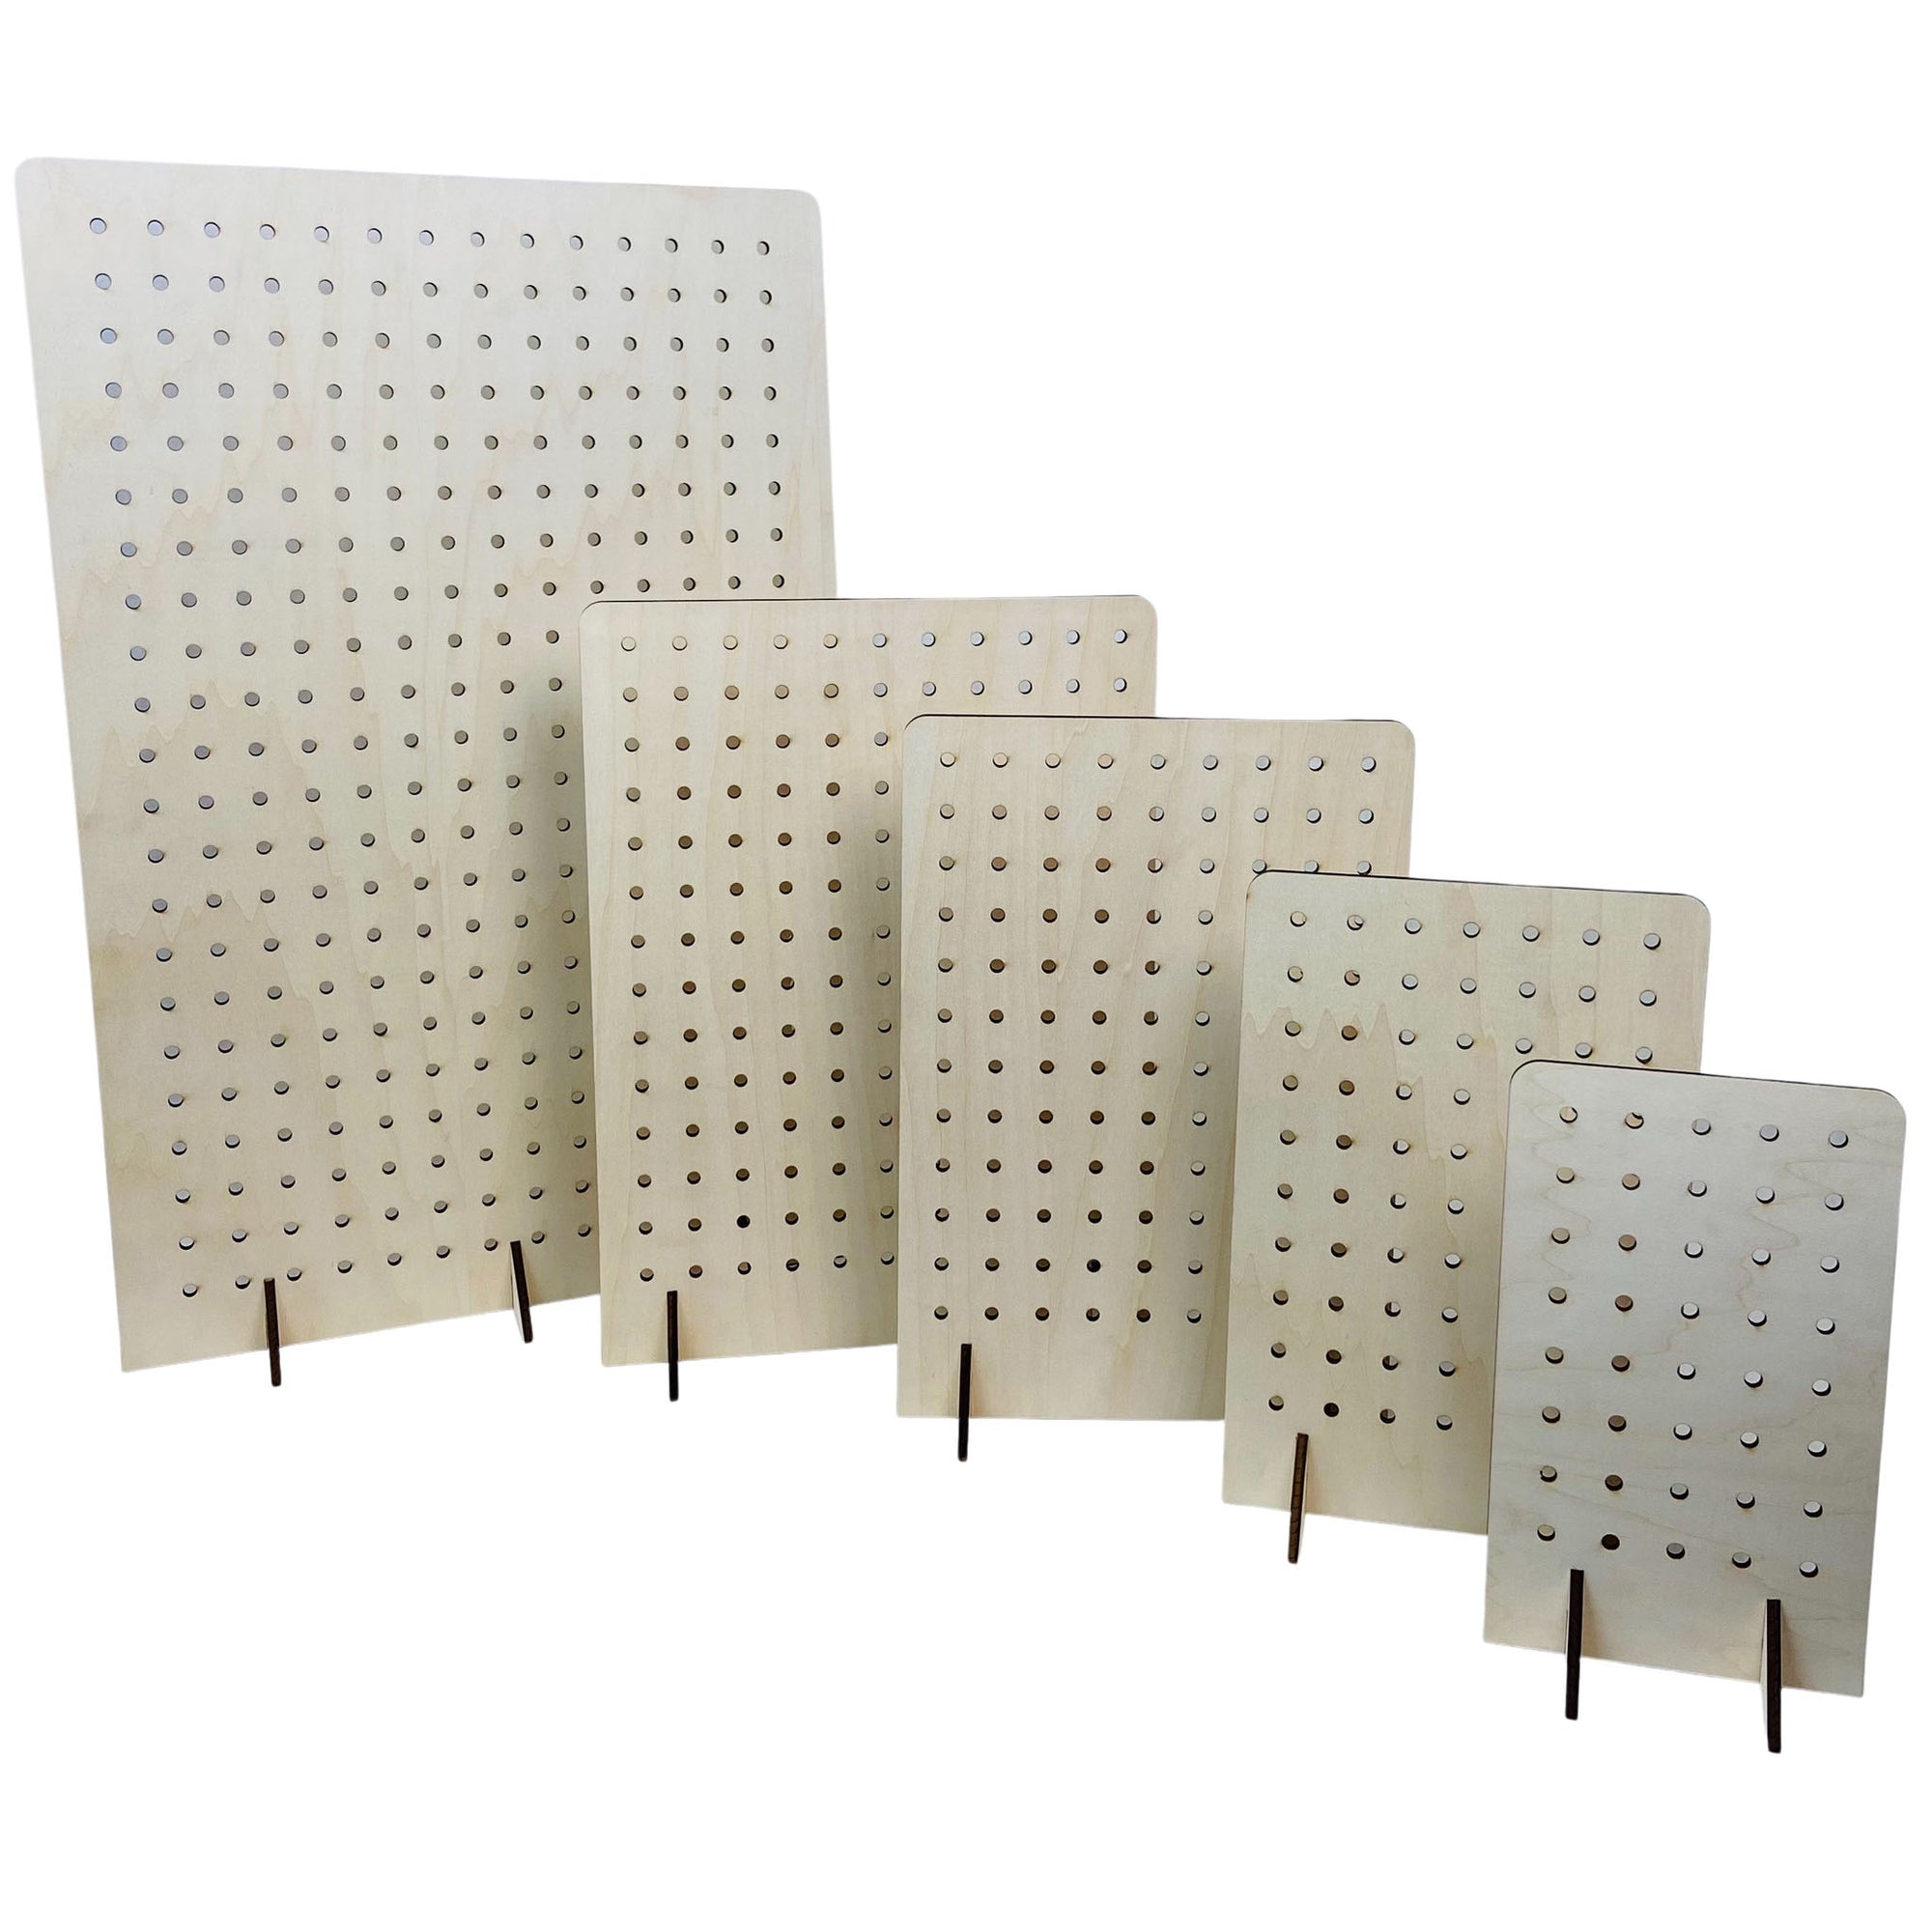 Pegboard Display in Various Sizes and Colors - Great for Peg Board Hooks or Bins and More